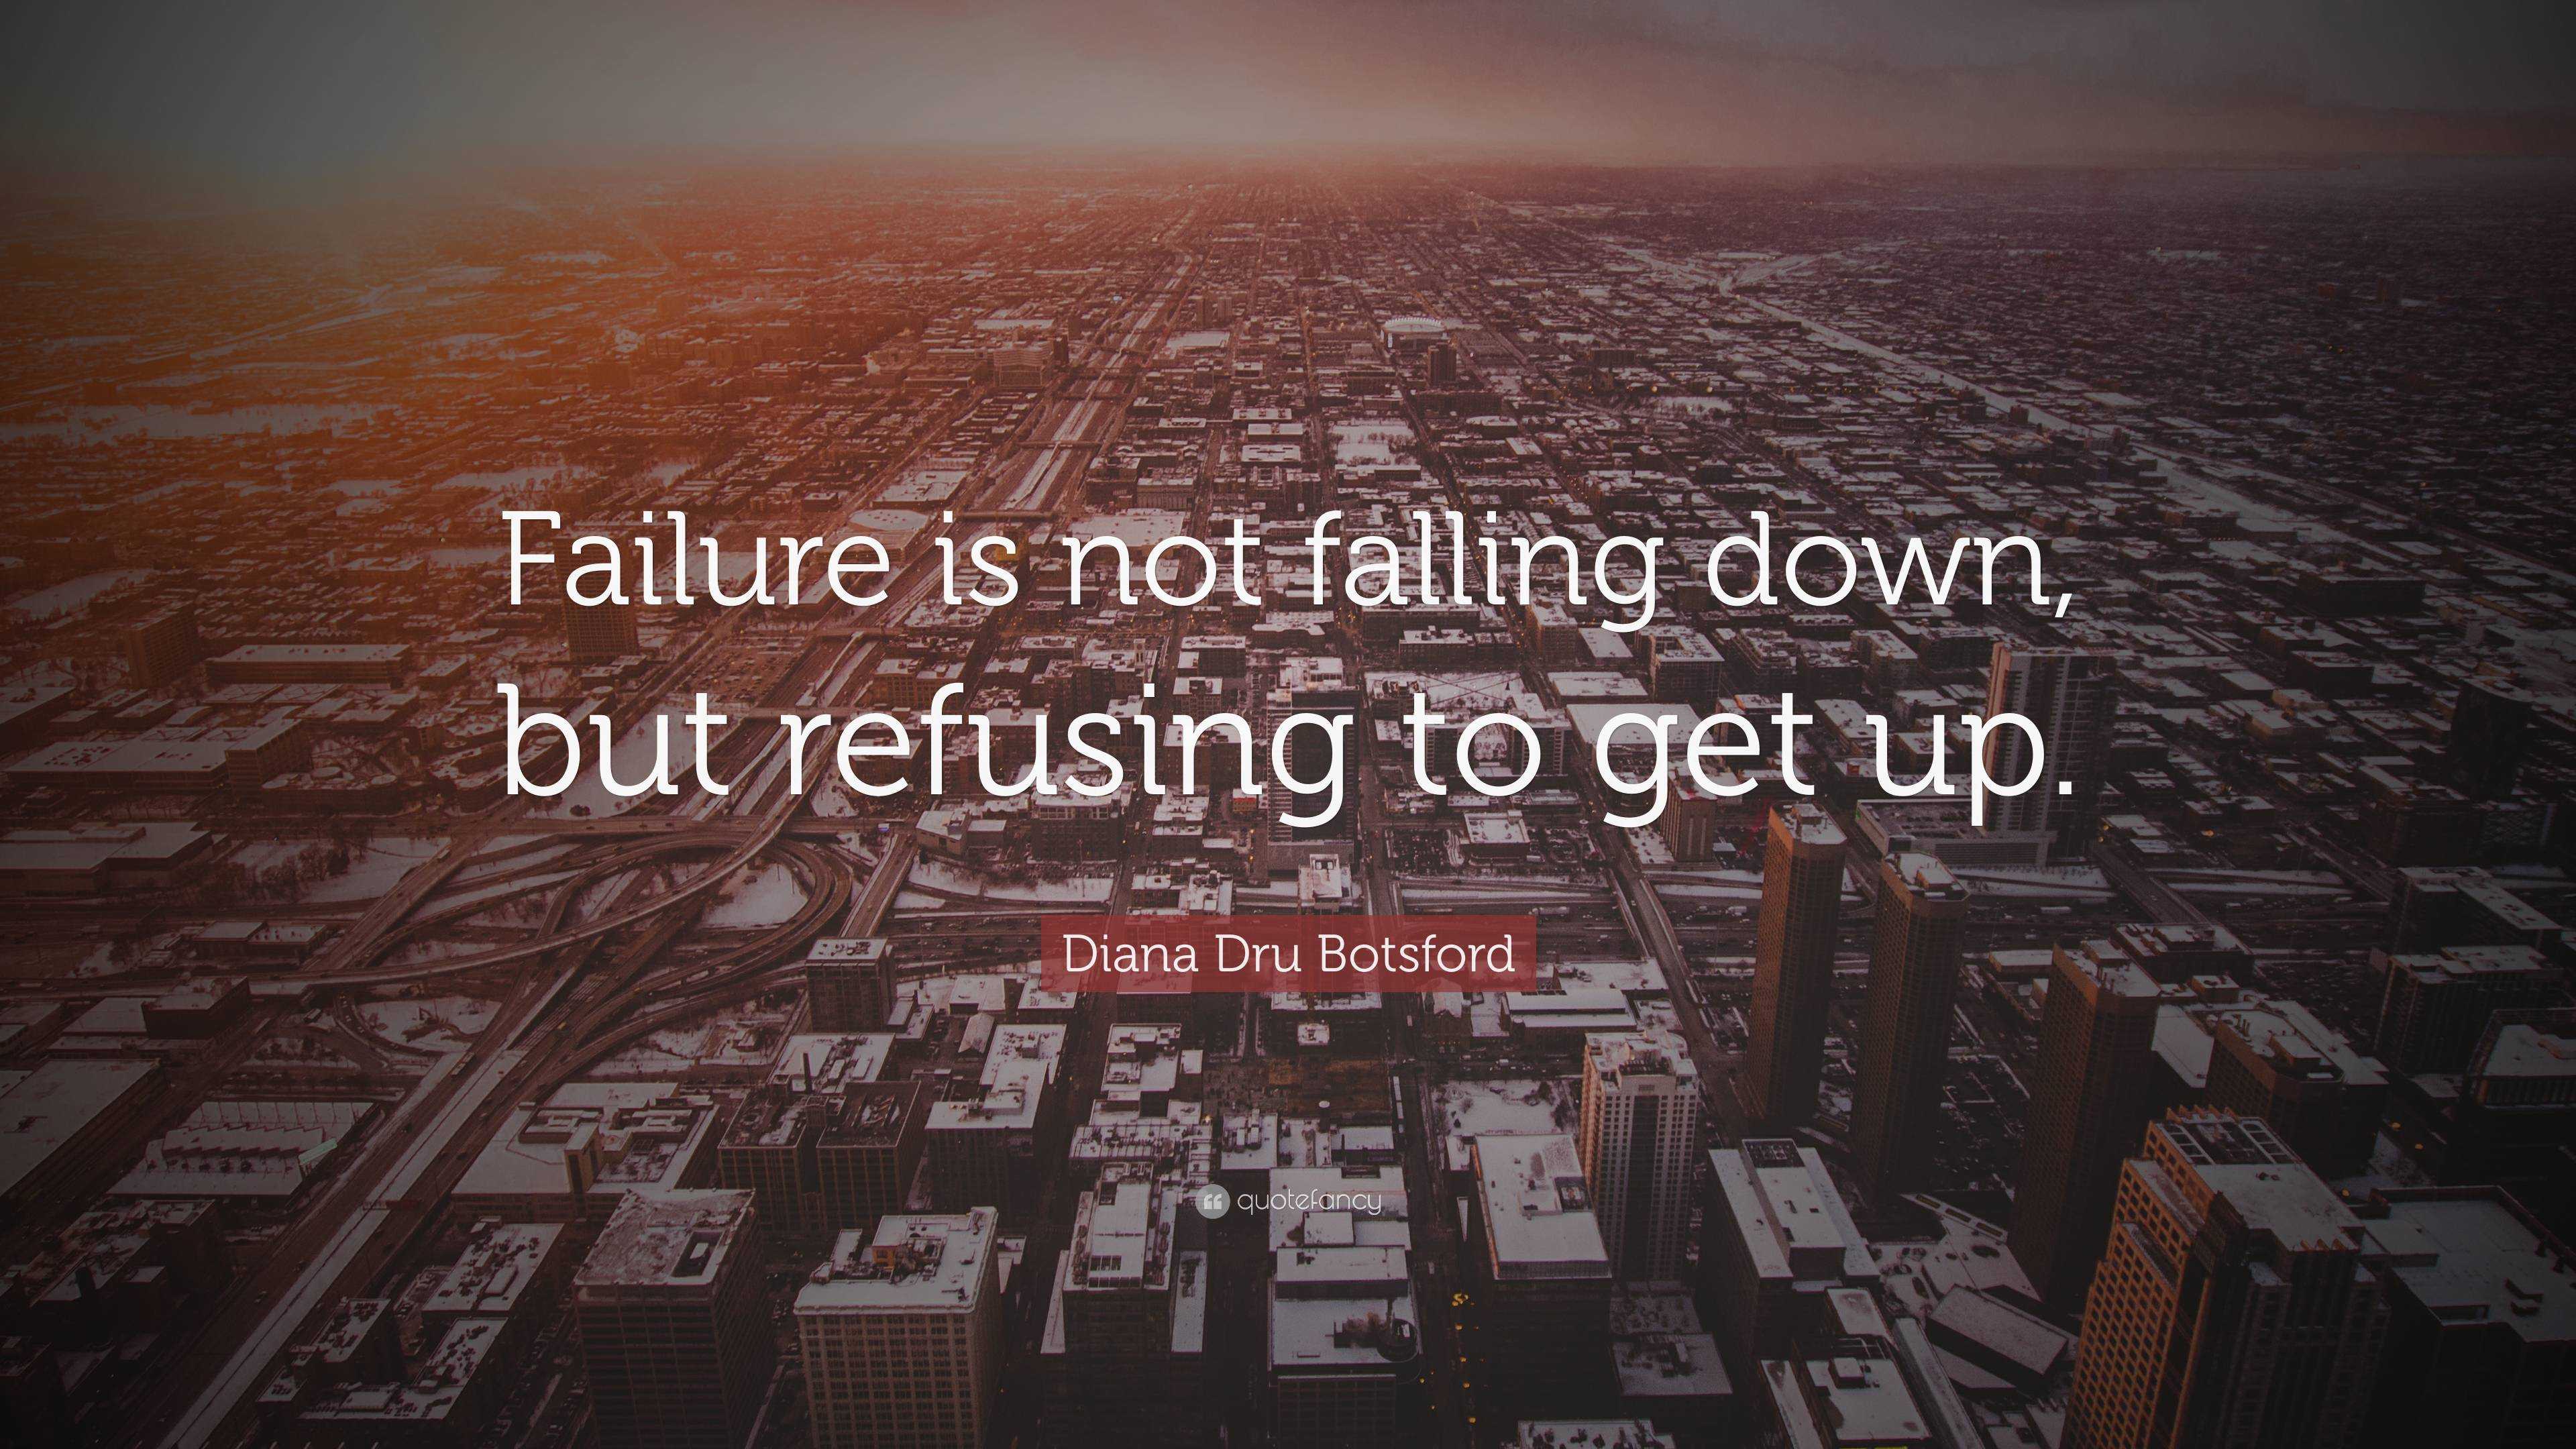 Diana Dru Botsford Quote: “Failure is not falling down, but refusing to ...